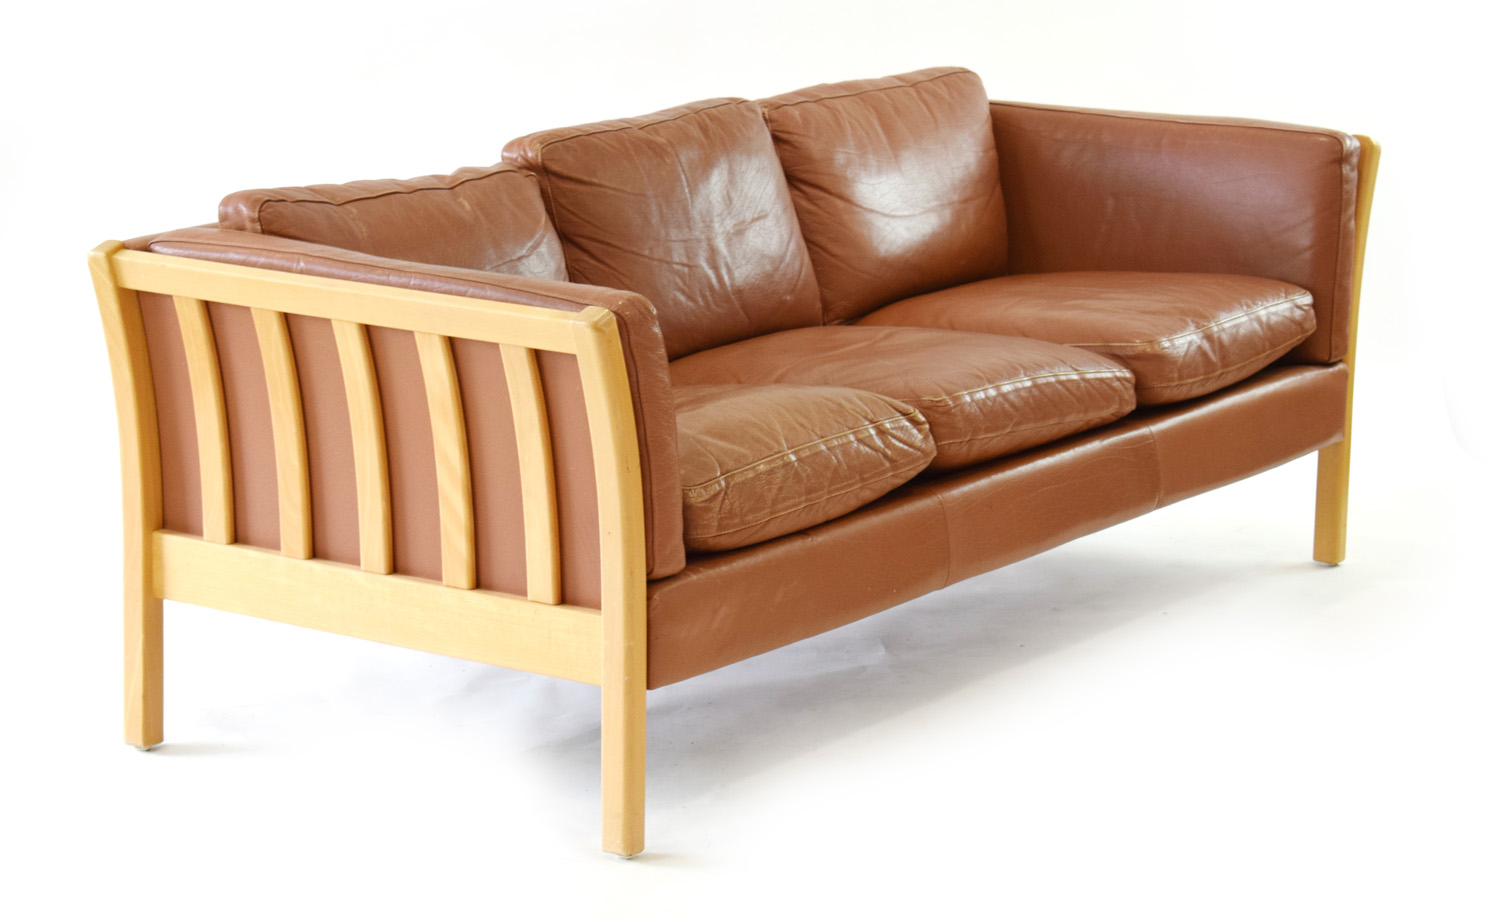 A Danish tan leather three seater sofa with an exposed beech frame, by Stouby, l. - Image 2 of 15